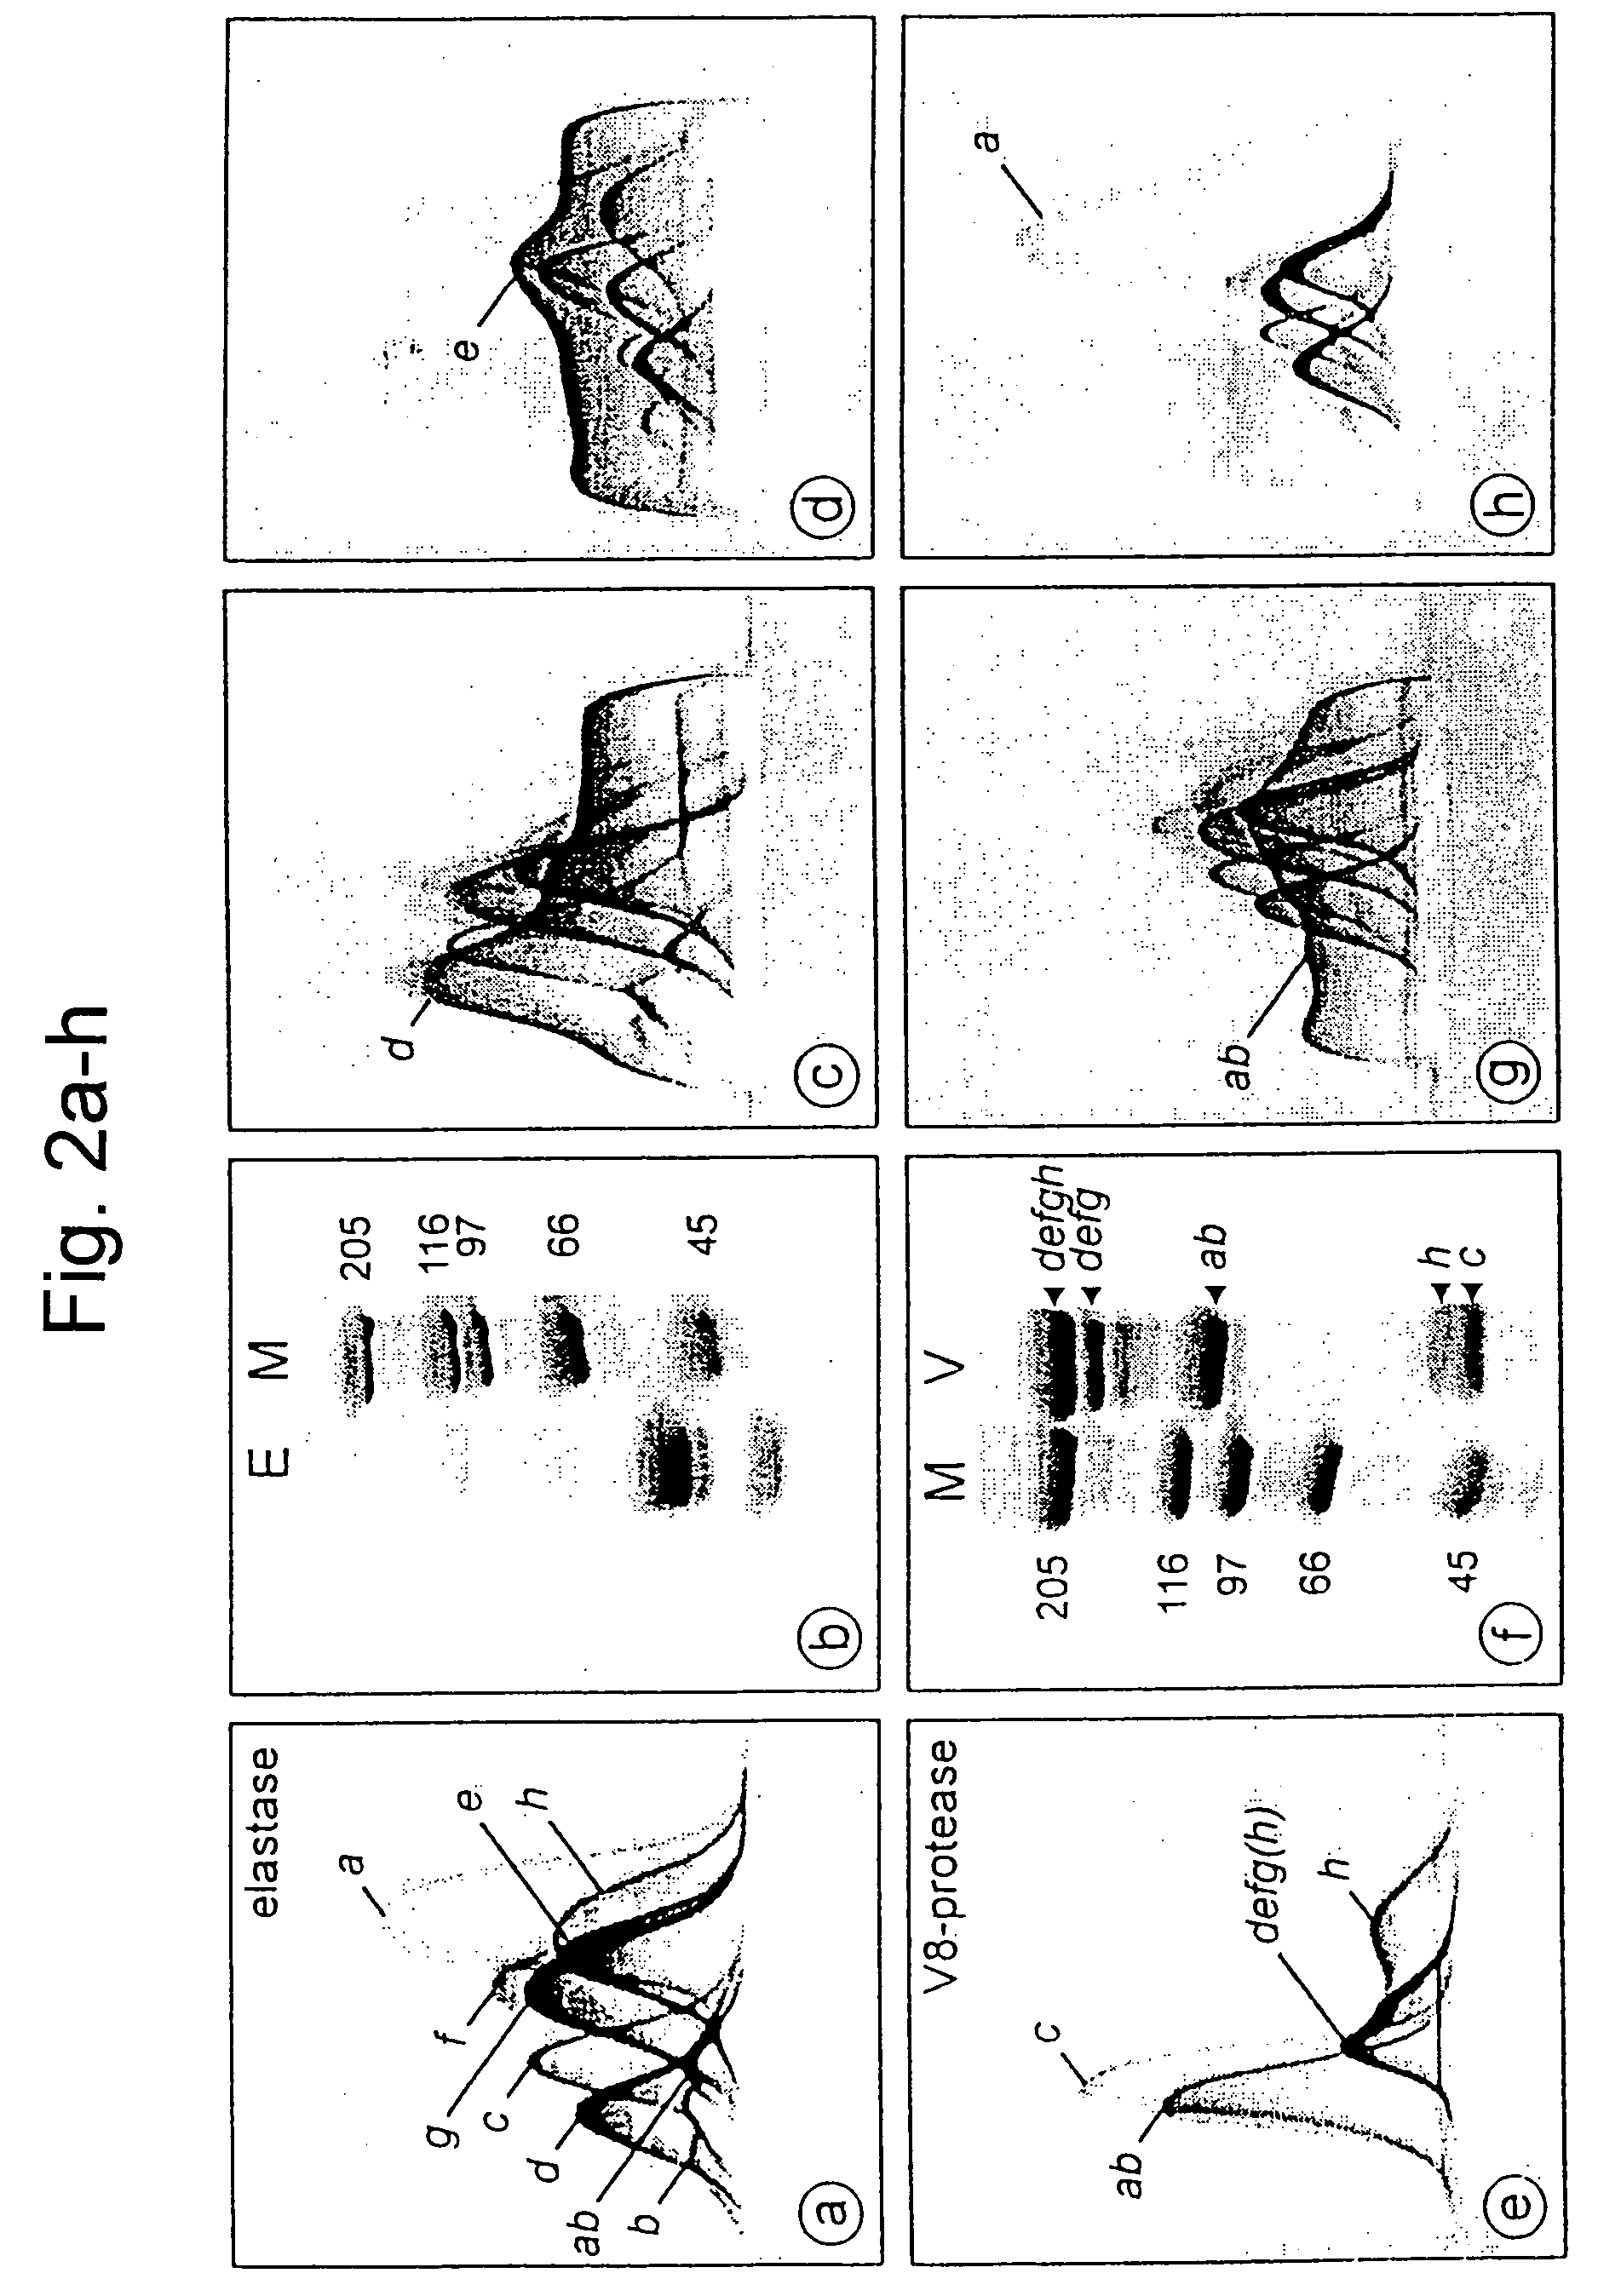 Nucleic acid molecule comprising a nucleic acid sequence coding for a haemocyanin